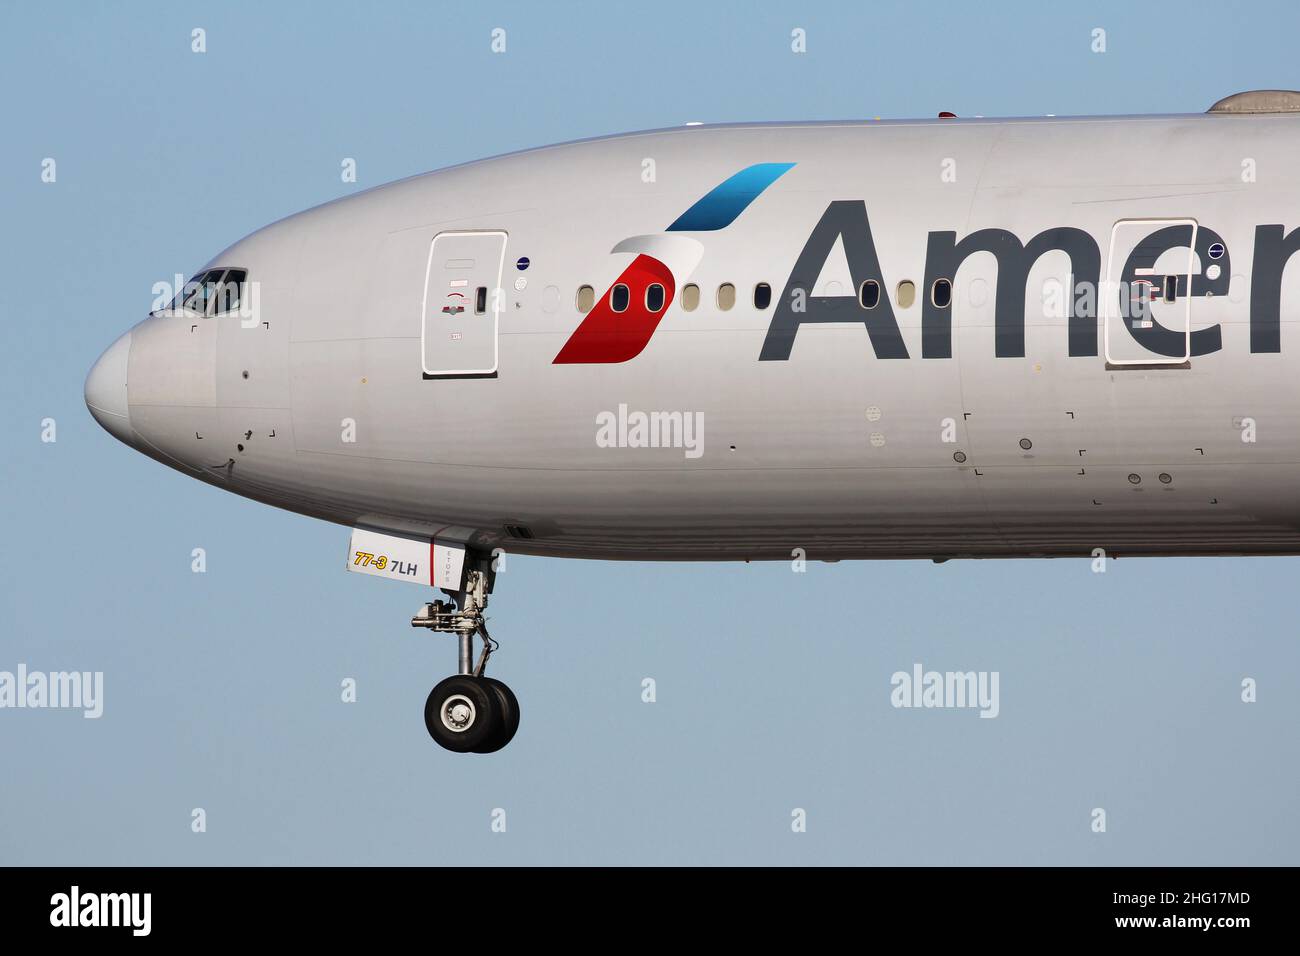 American Airlines Boeing 777-300ER arriving at London Heathrow airport after a flight from the USA Stock Photo